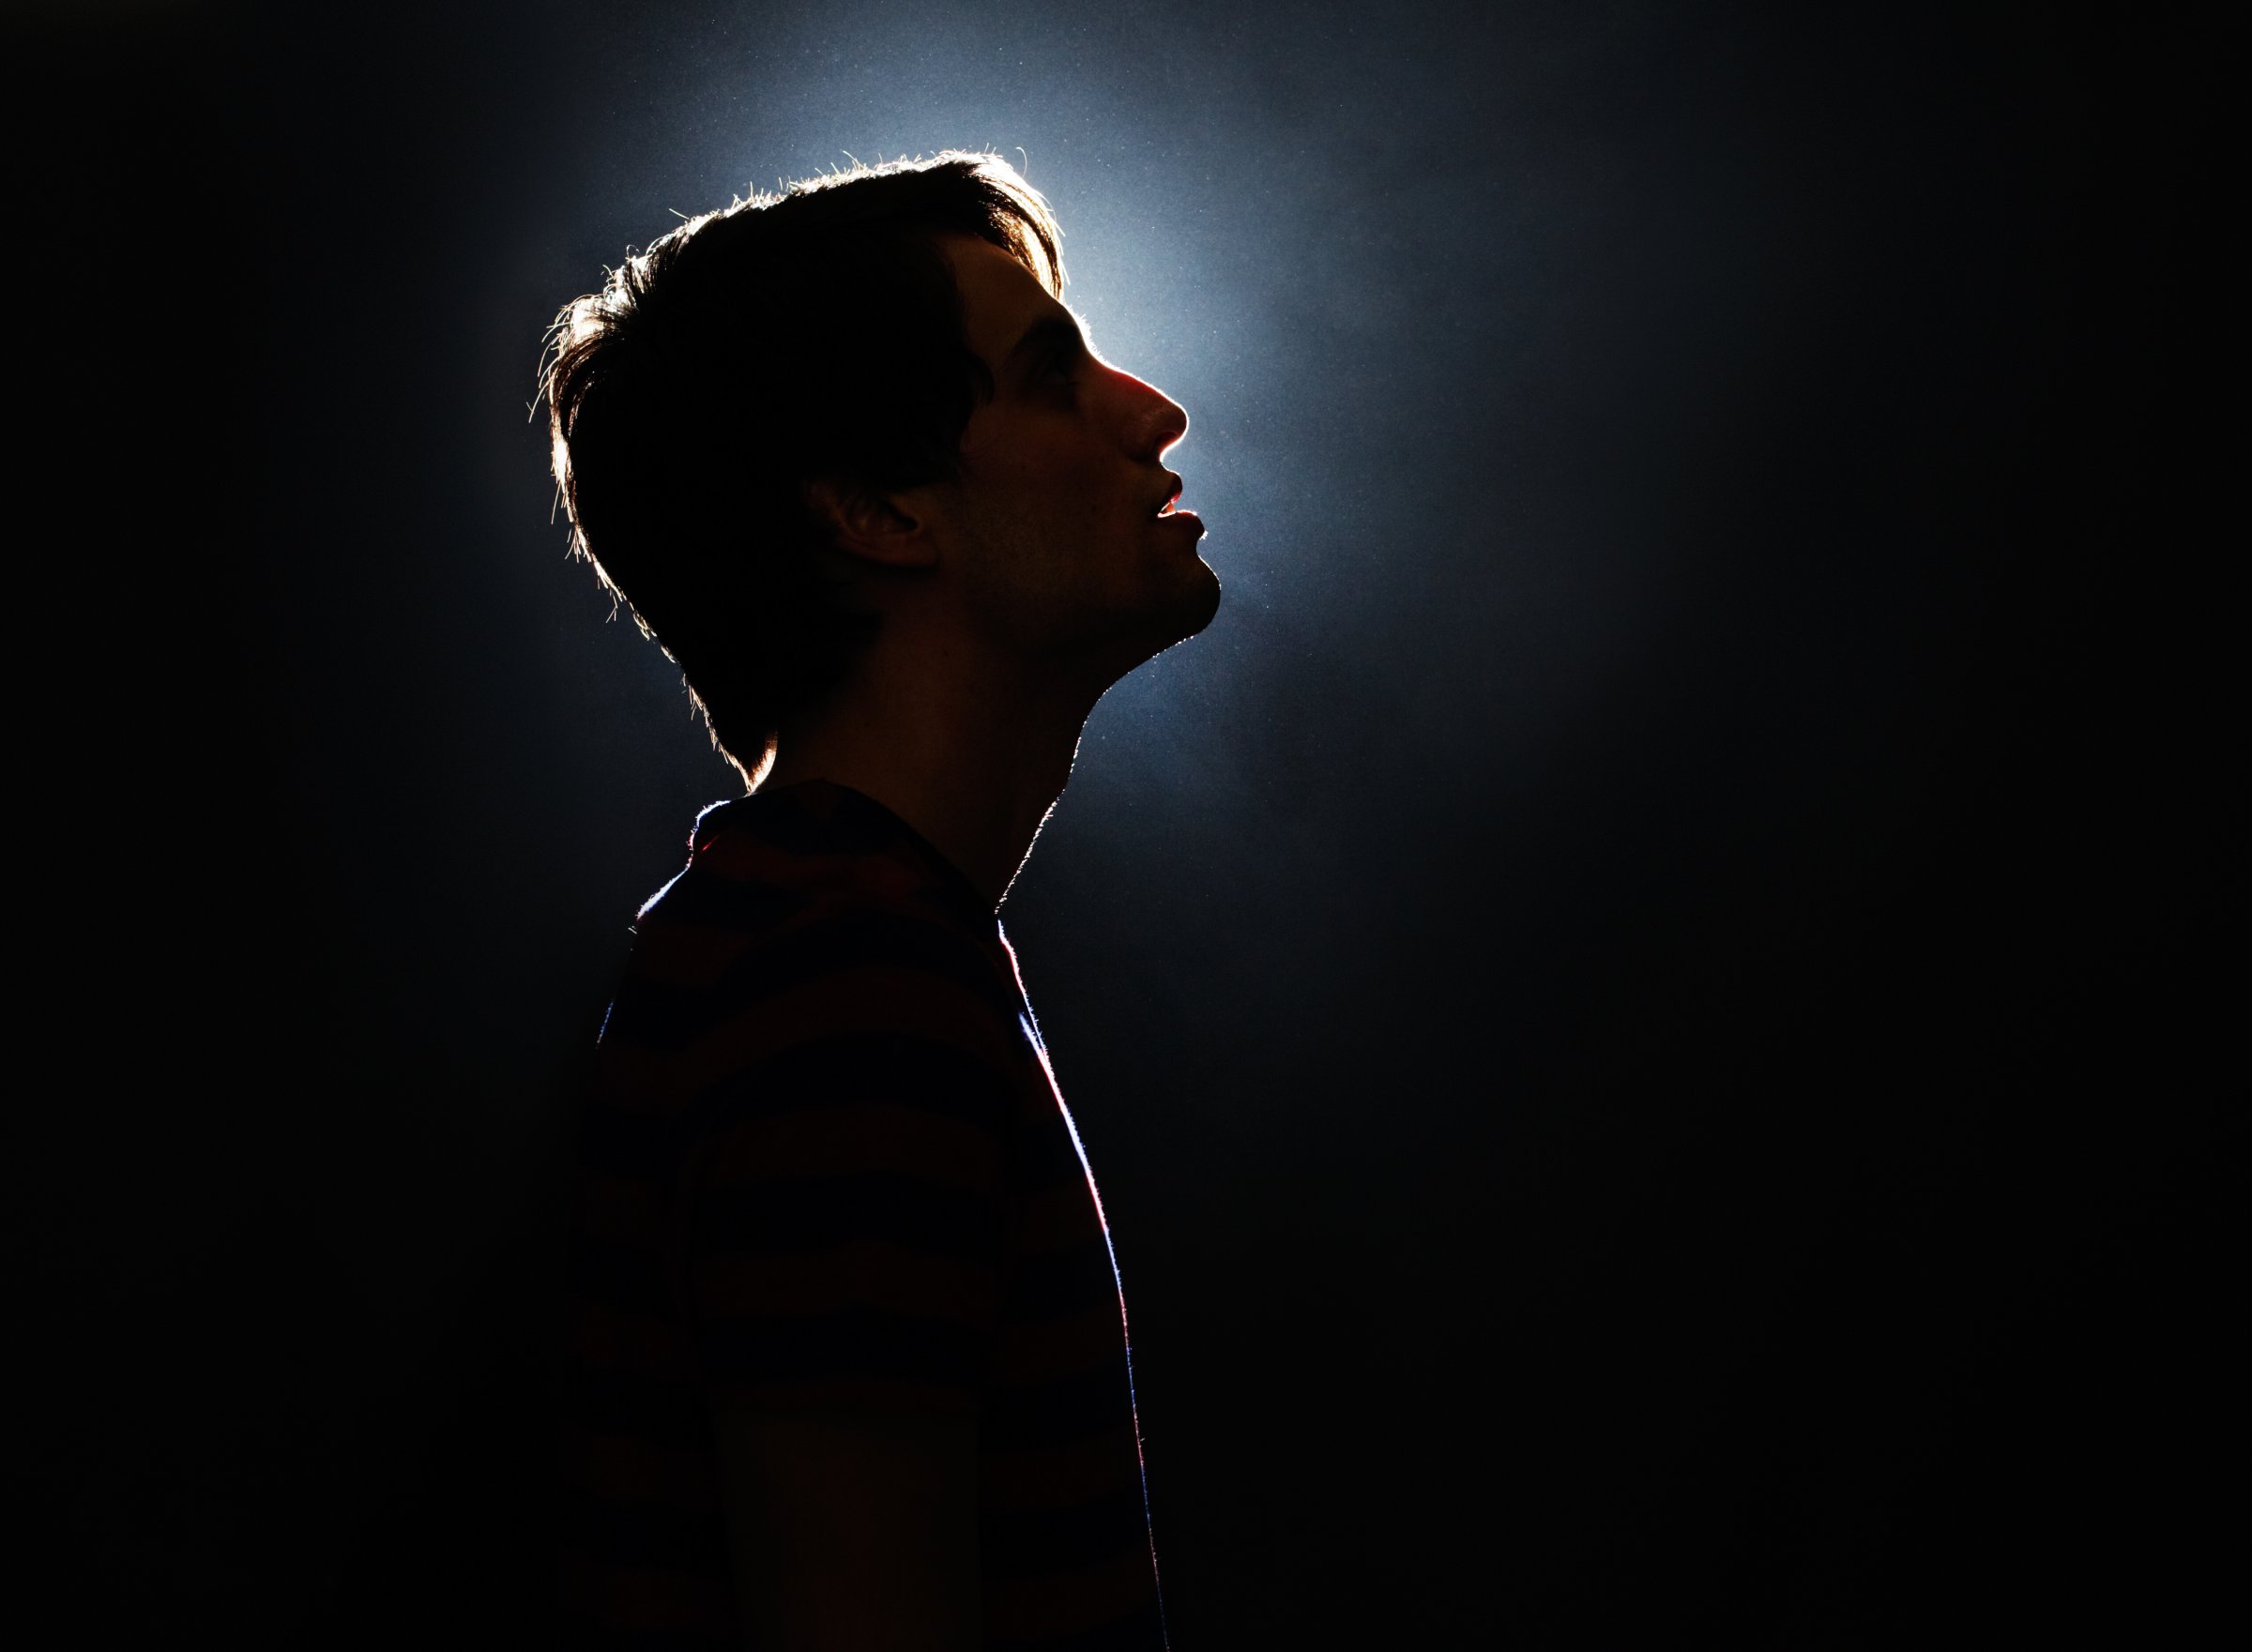 Silhouette of young man looking up.